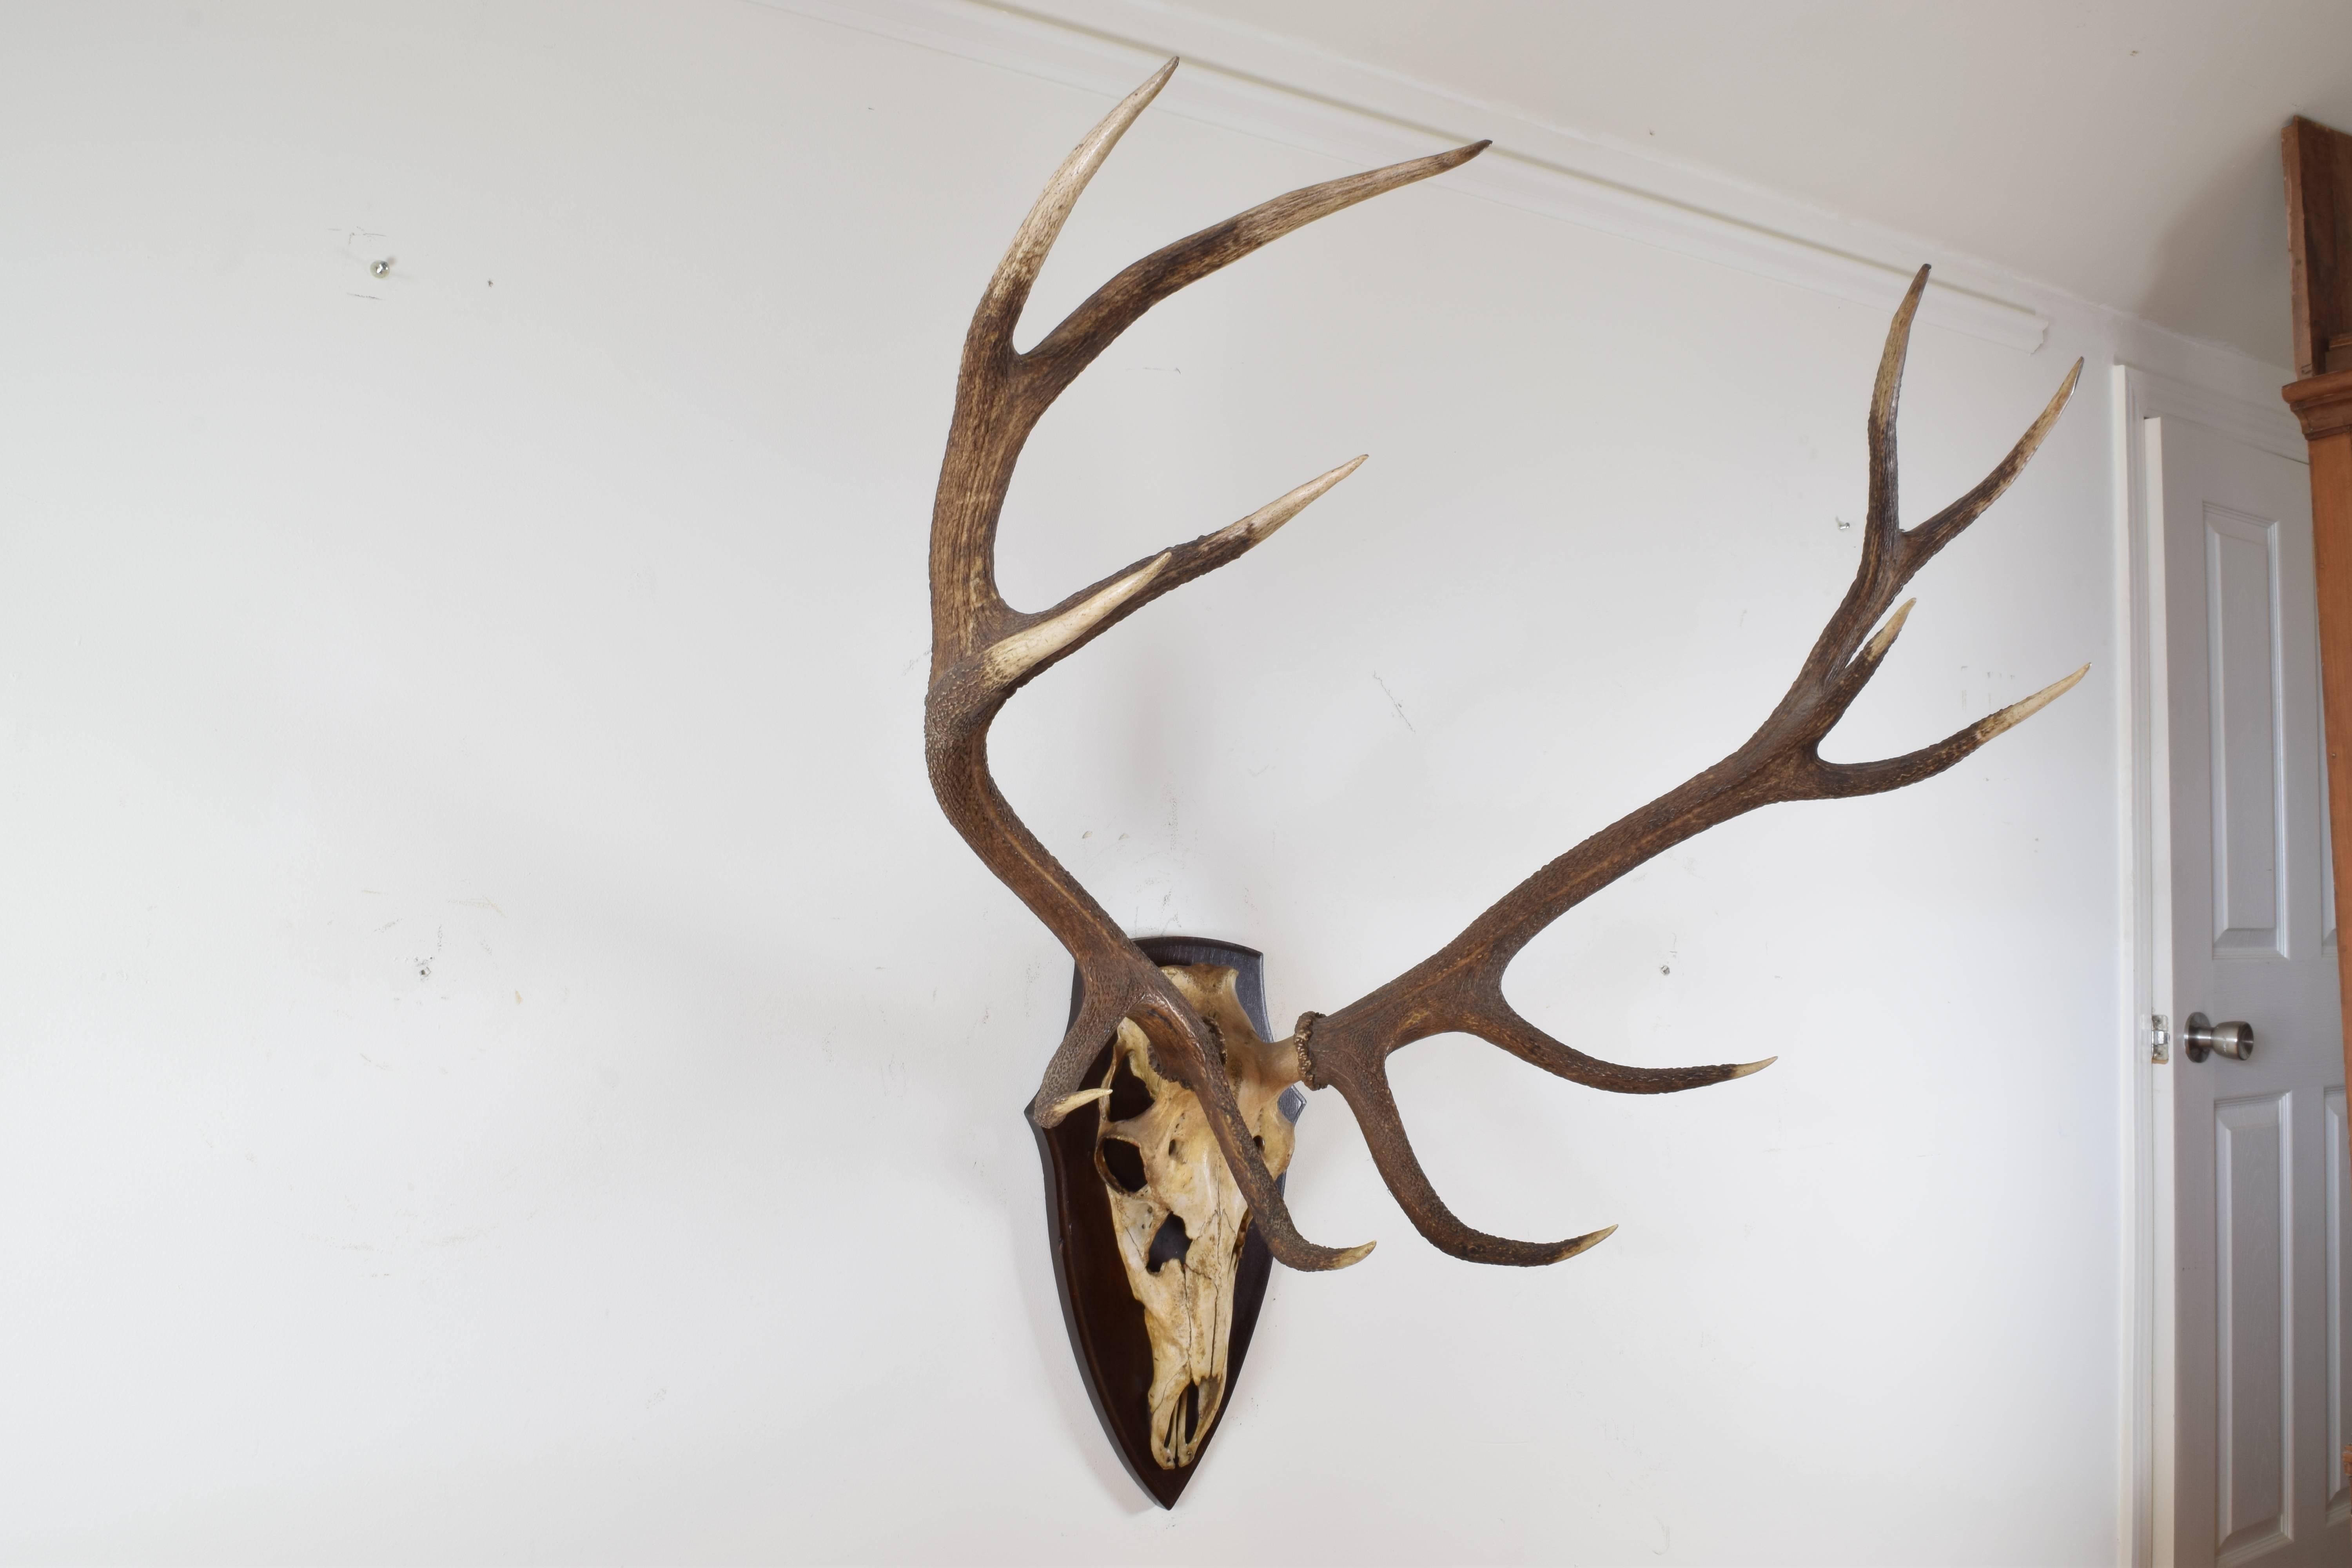 large antler rack and partial skull mounted on a shield-form backplate